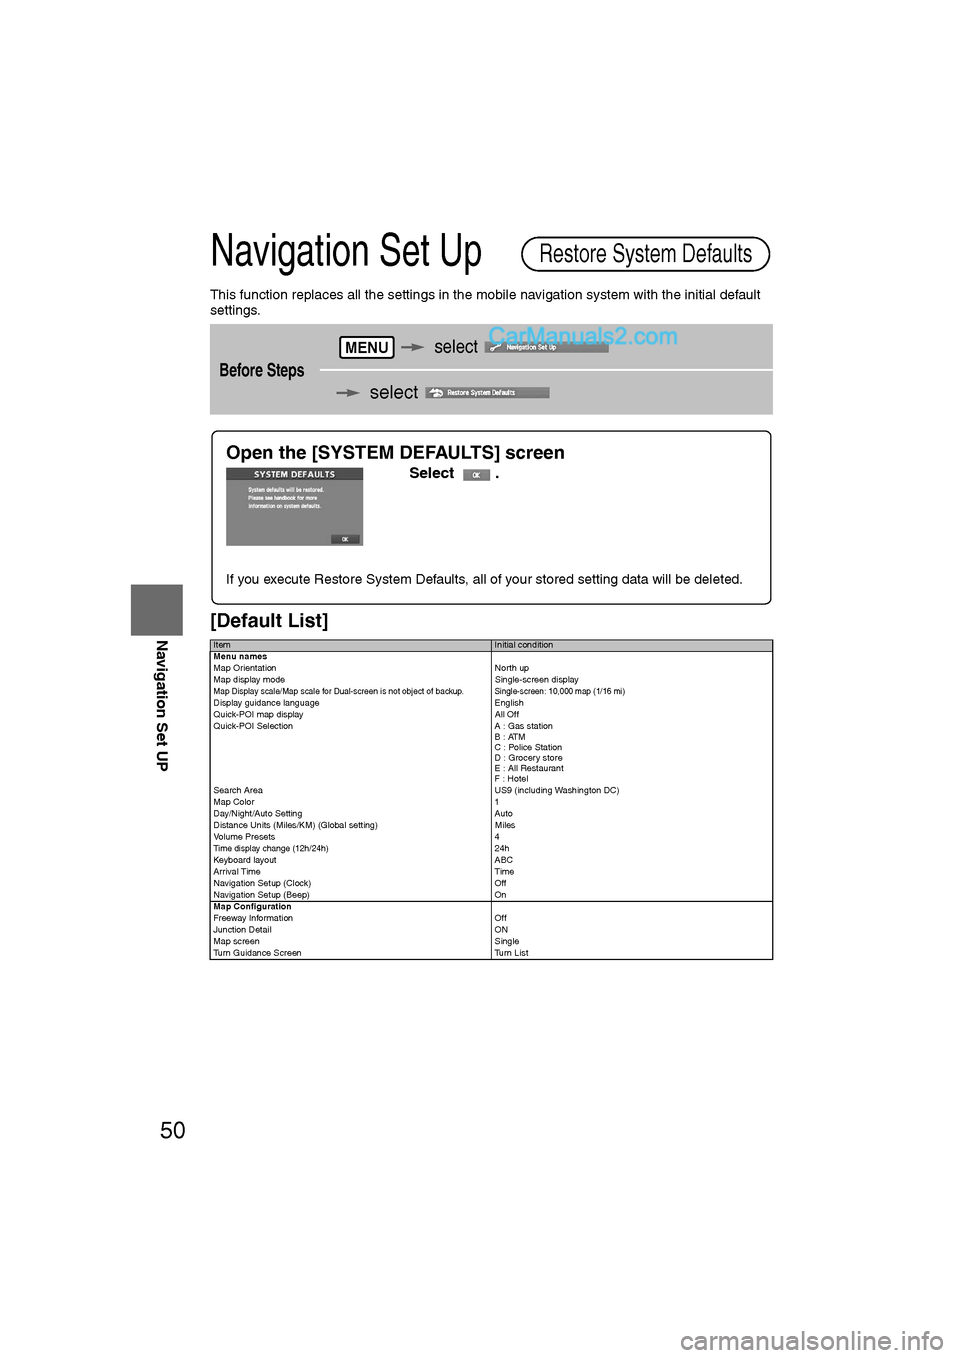 MAZDA MODEL CX-9 2007  Navigation Manual (in English) 50
RoutingAddress 
Book
Navigation Set UP
Navigation Set Up
This function replaces all the settings in the mobile navigation system with the initial default 
settings.
[Default List]
Restore System De